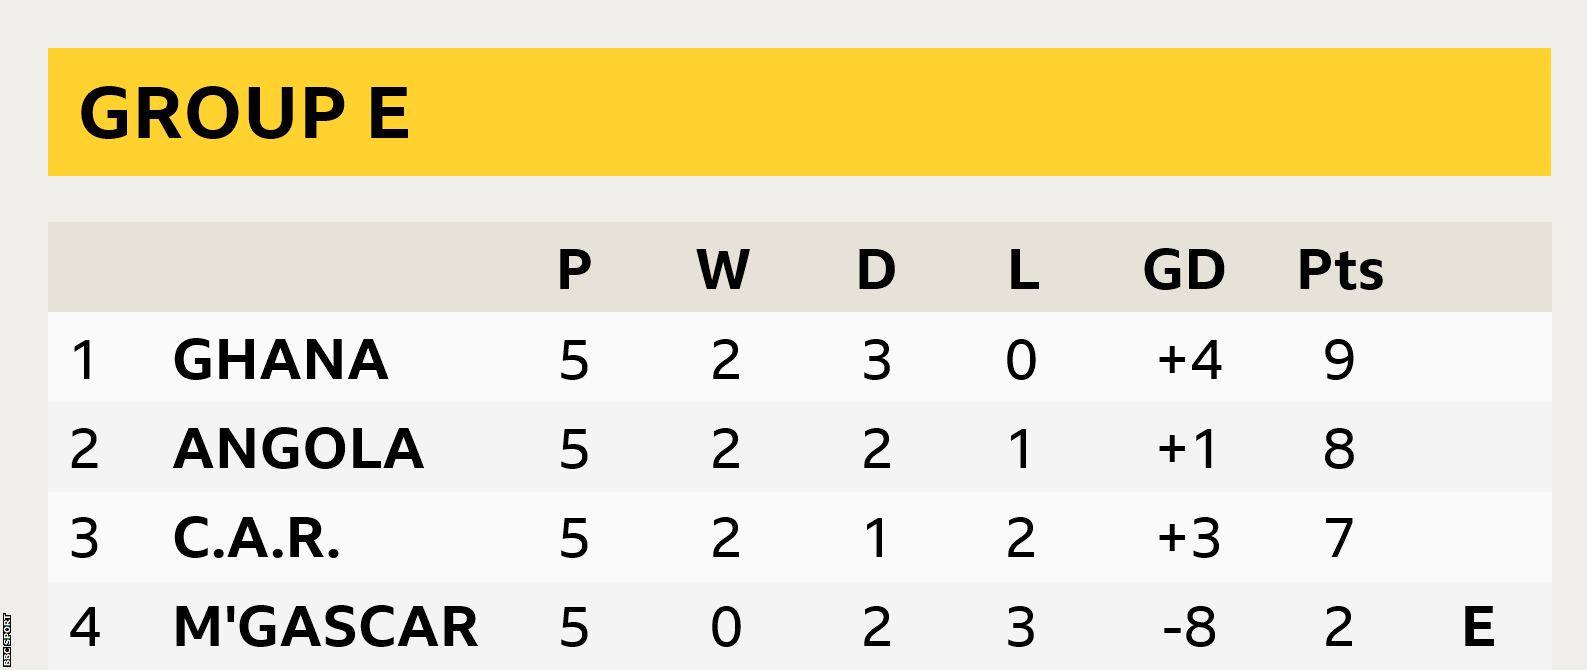 Group E table for the Afcon 2023 qualifiers